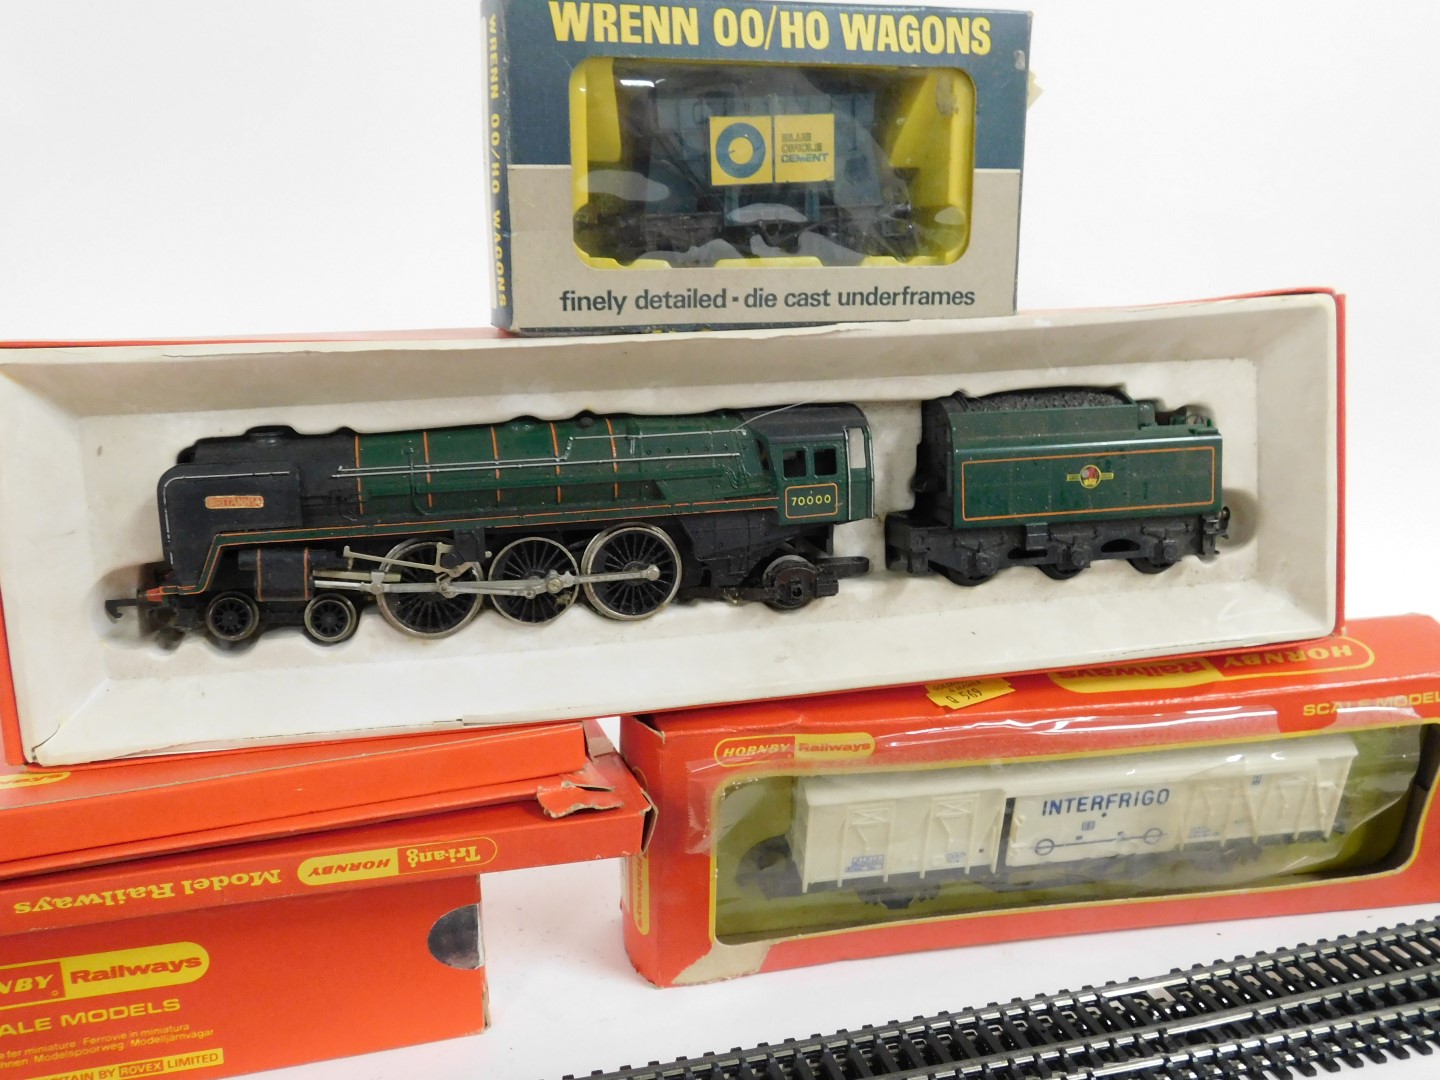 A Hornby OO gauge locomotive Britannia, BR Green livery, 7000. 4-6-2, together with coaches, wagons, - Image 2 of 4